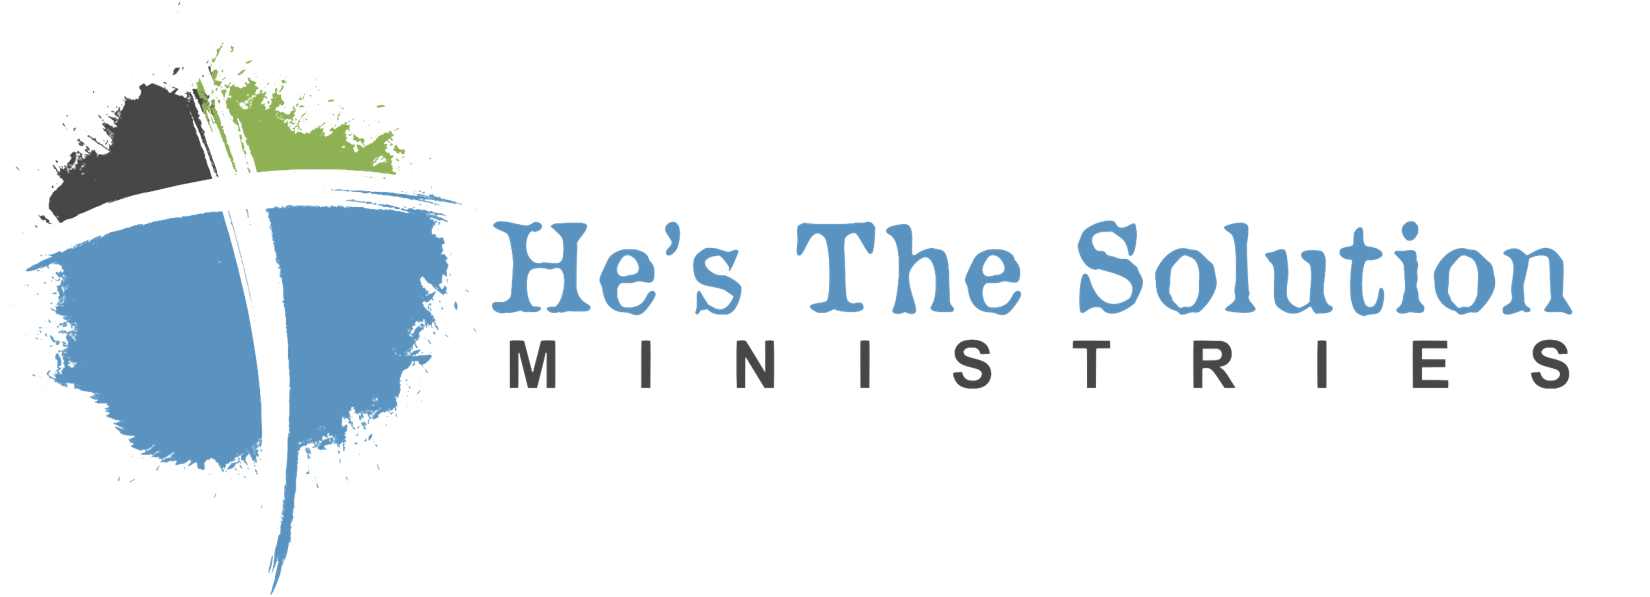 He's The Solution Ministries